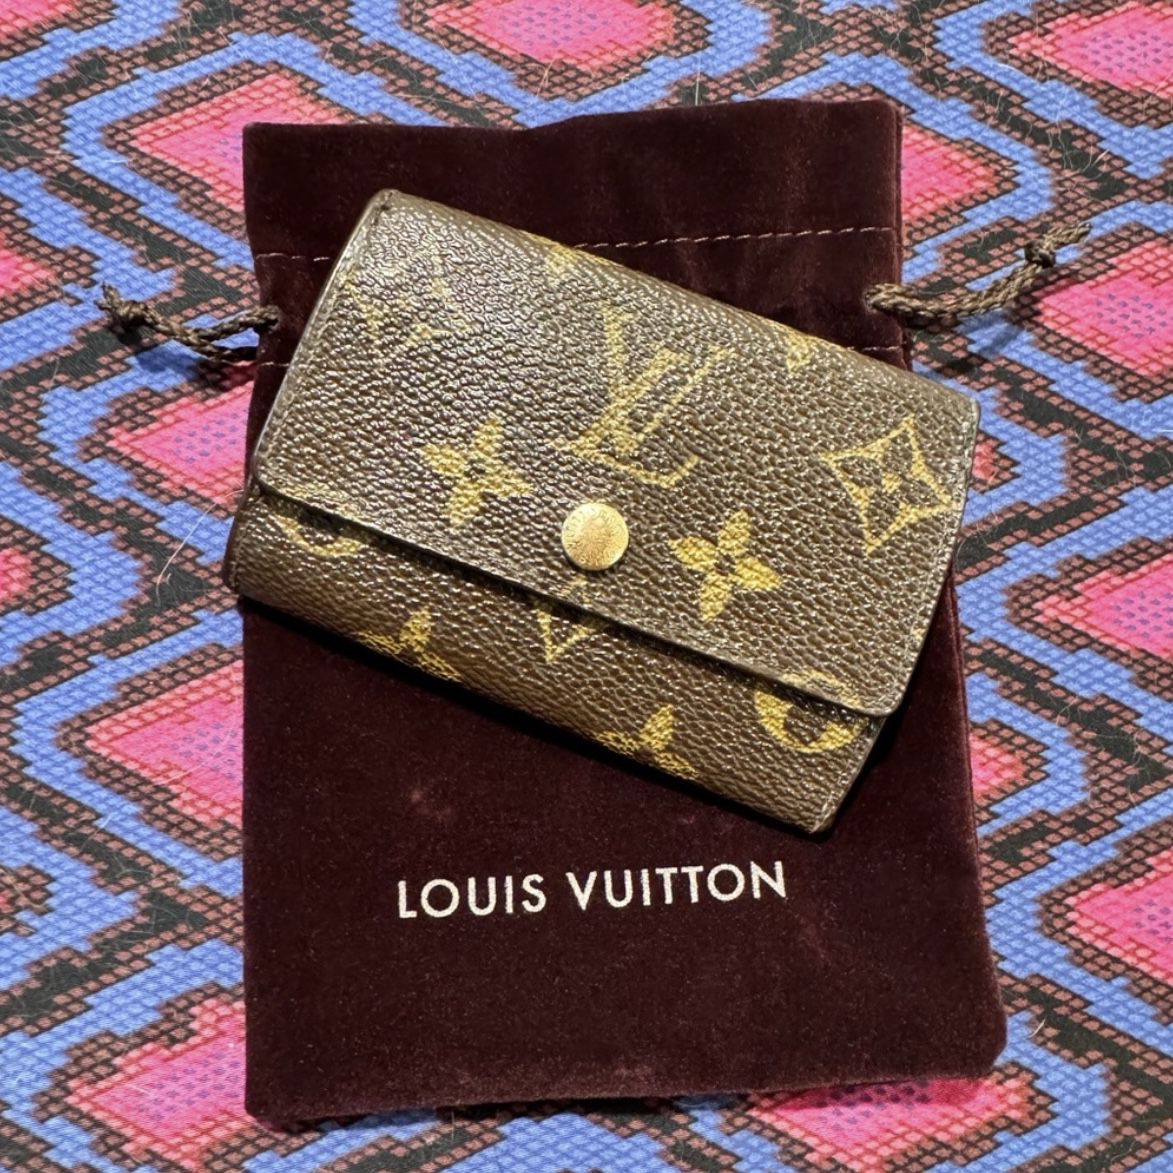 100% Authentic Louis Vuitton 6-Ring Key Holder